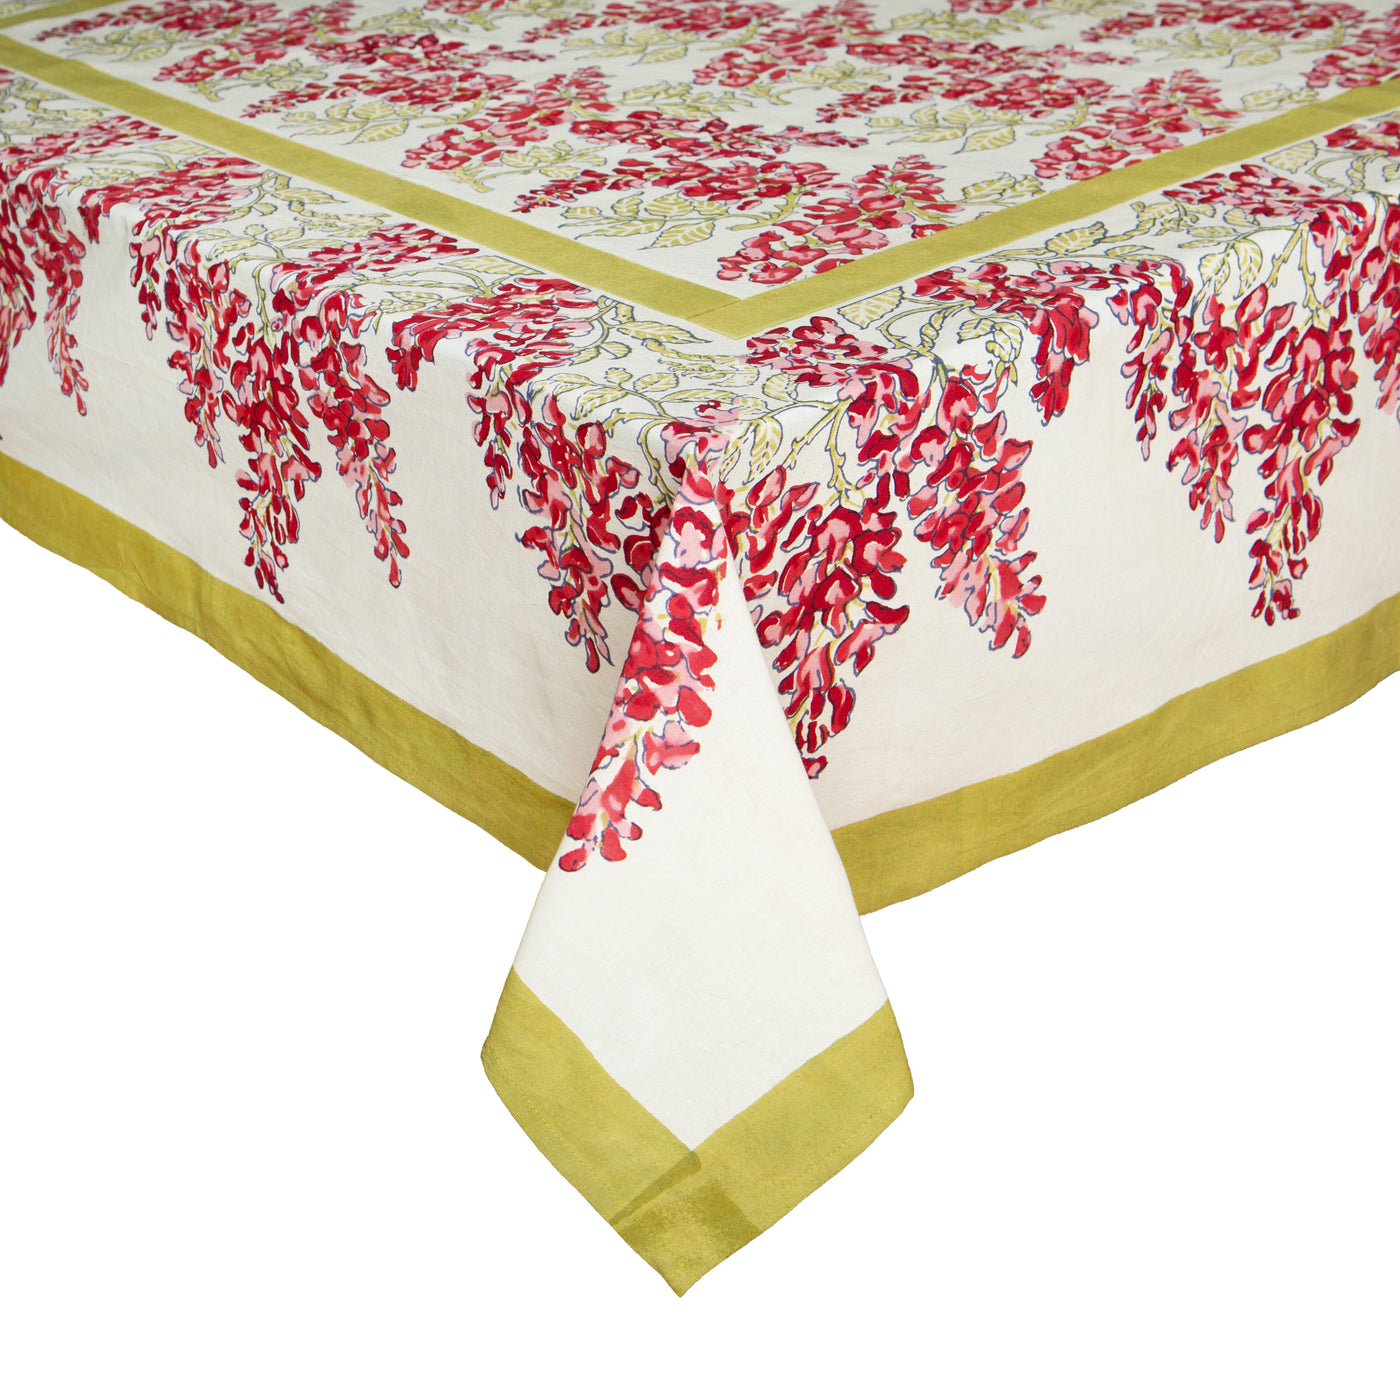 French Tablecloth Wisteria Green & Pink